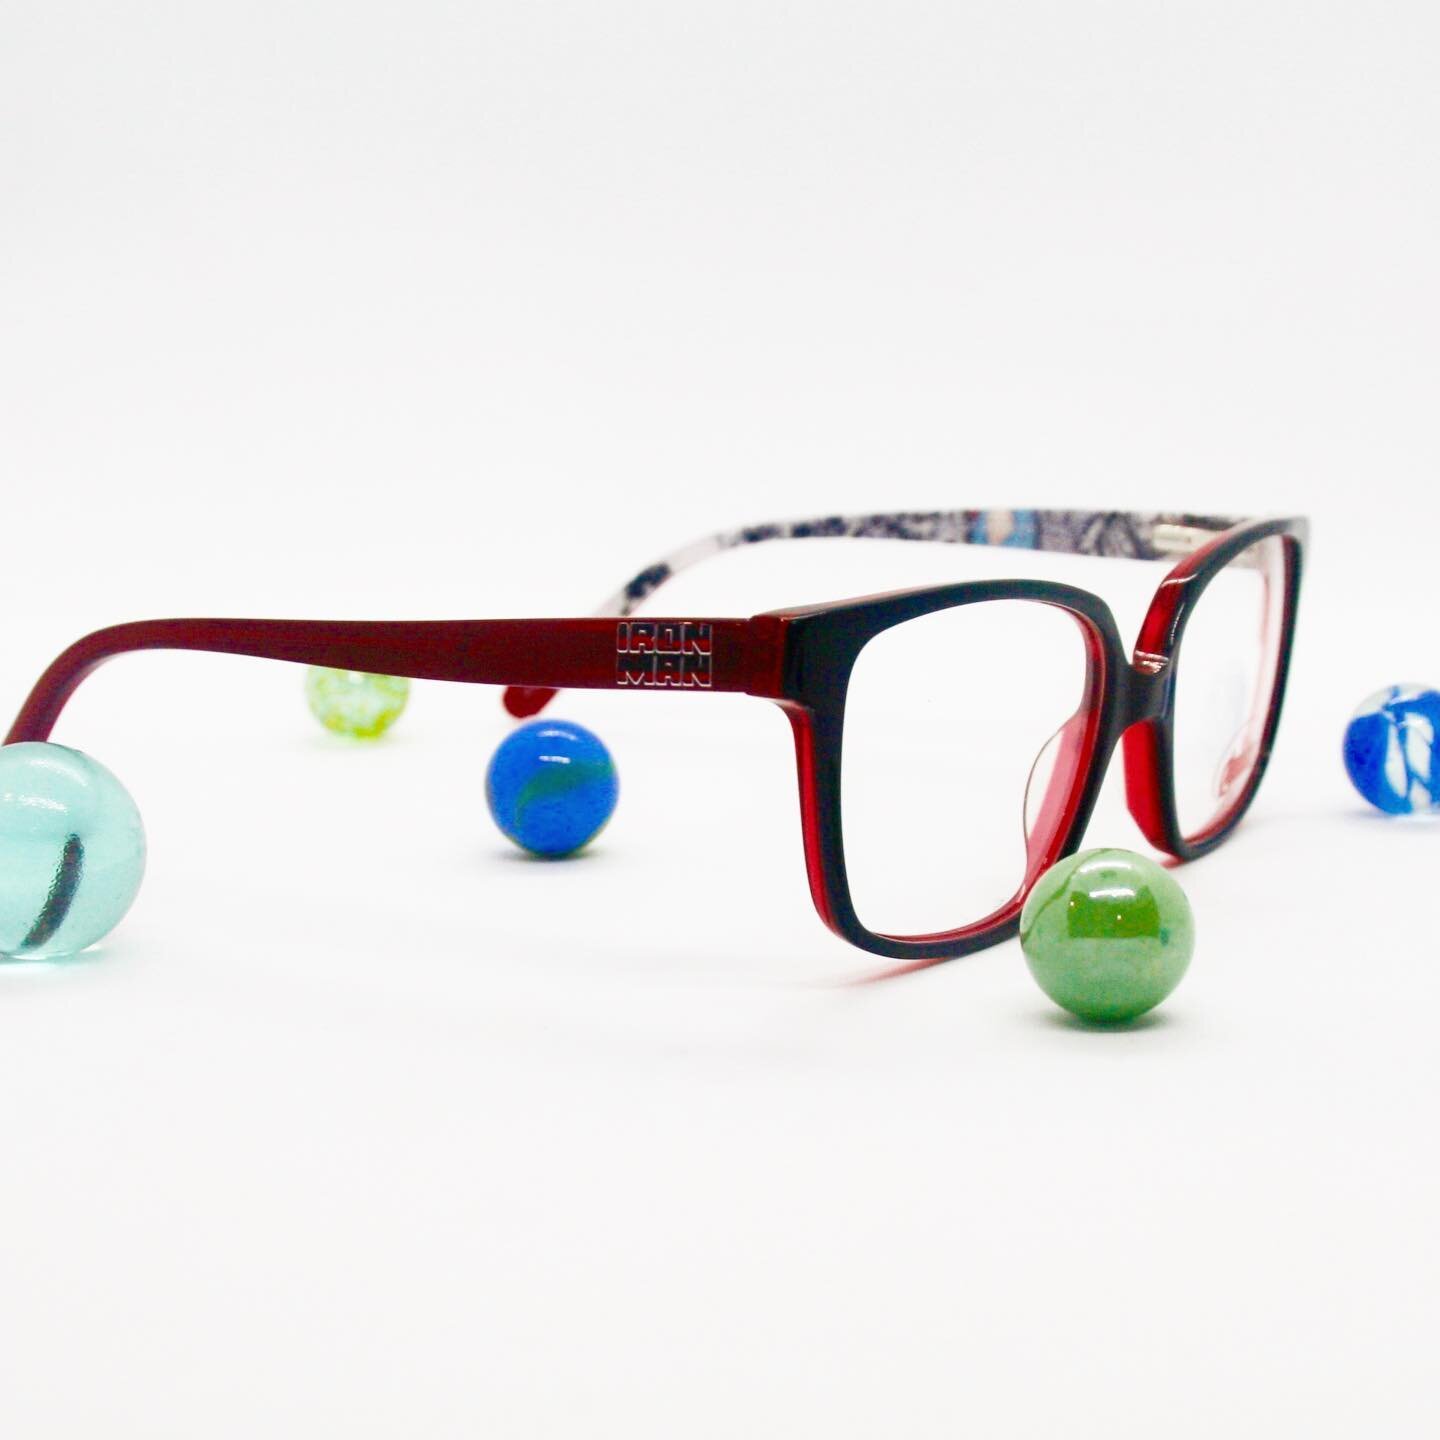 We want your little one to &ldquo;love their glasses 3000&rdquo;, and what better way to do that than to bring Tony Stark to them on our Iconic Avengers range! 
-
The Avengers collection exhibits a number of designs to allow every young one to feel l